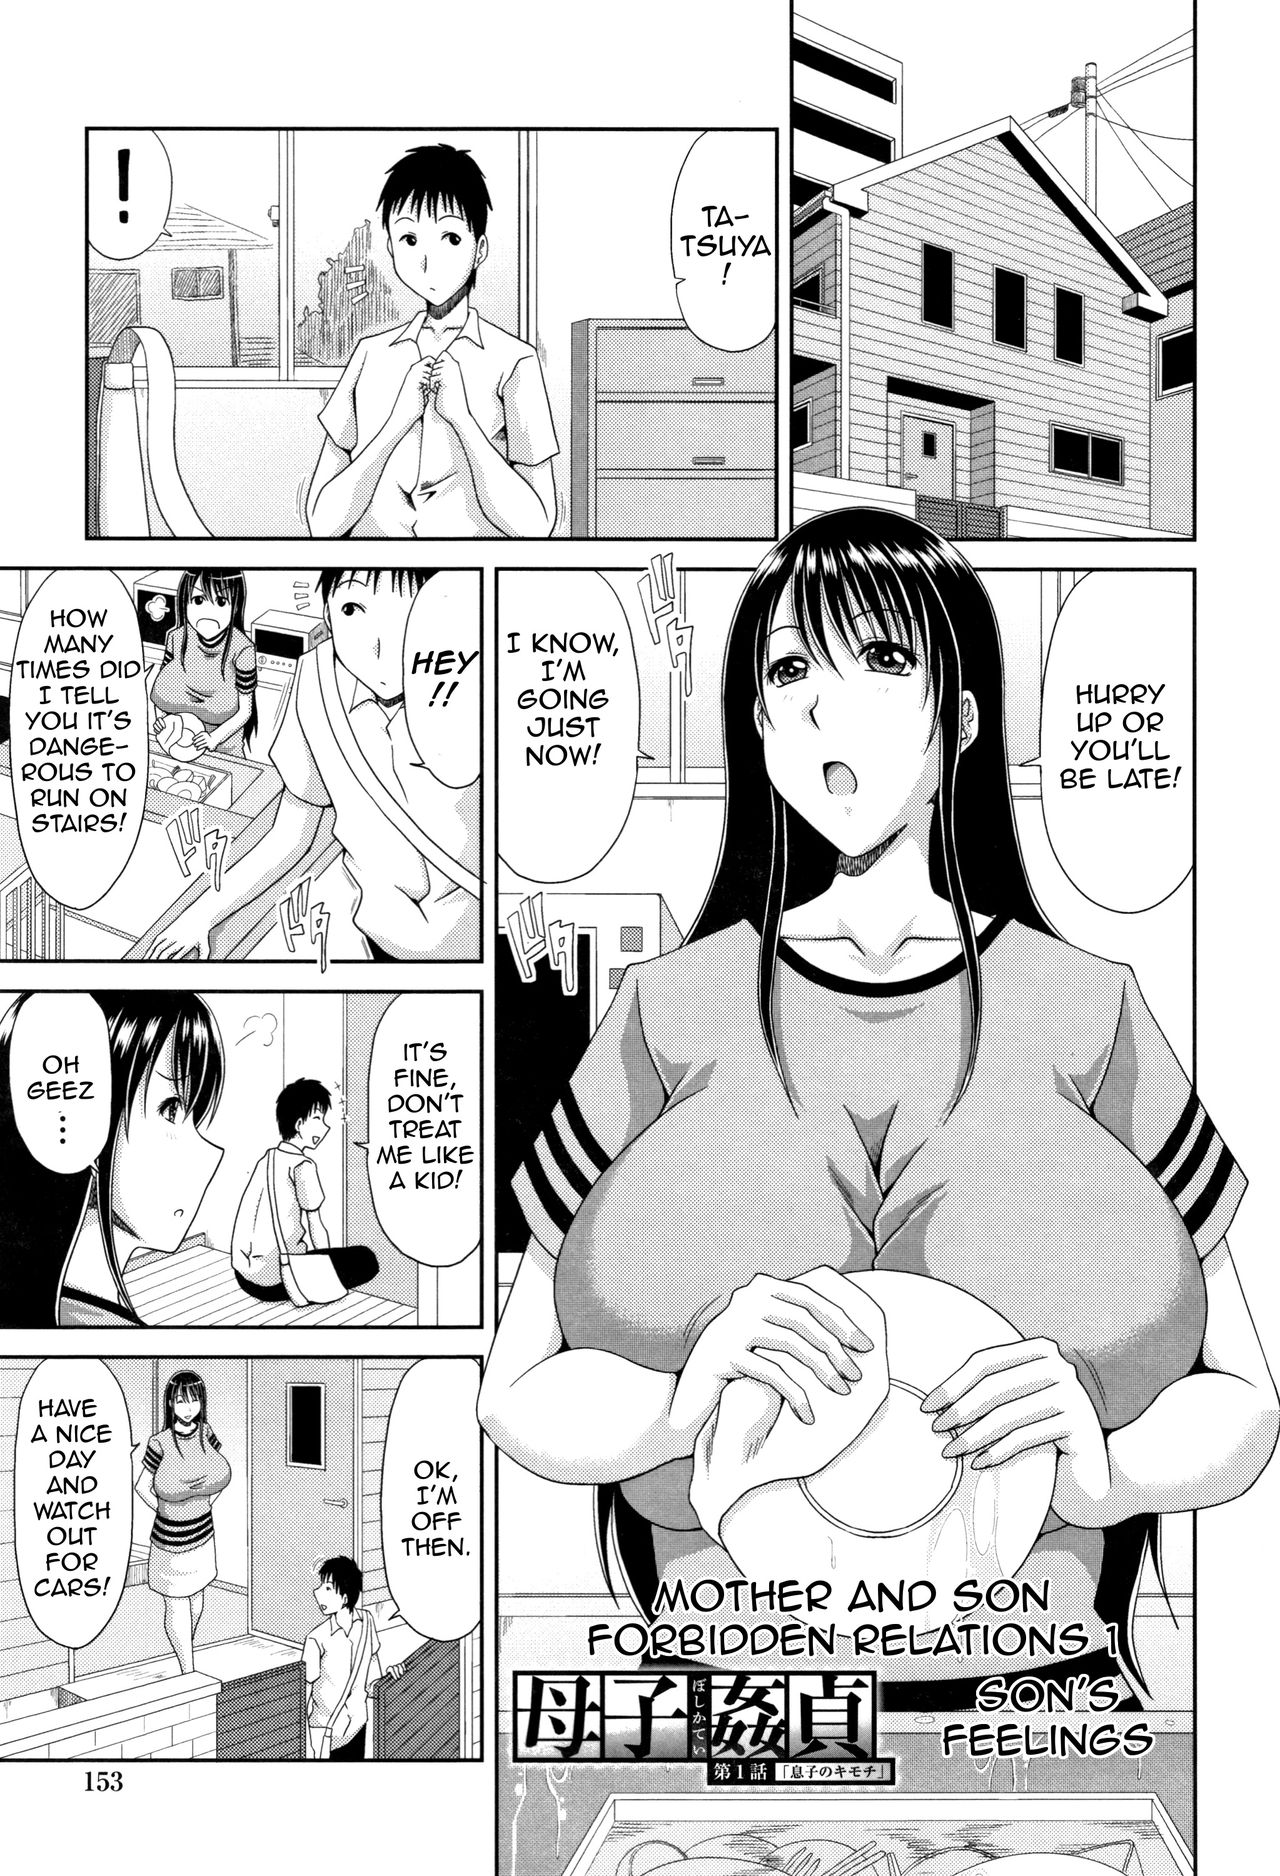 West Indies Sex Mother Son - Mother and Son Forbidden Relations [Kai Hiroyuki] - 1 . Mother and Son  Forbidden Relations - Chapter 1 [Kai Hiroyuki] - AllPornComic